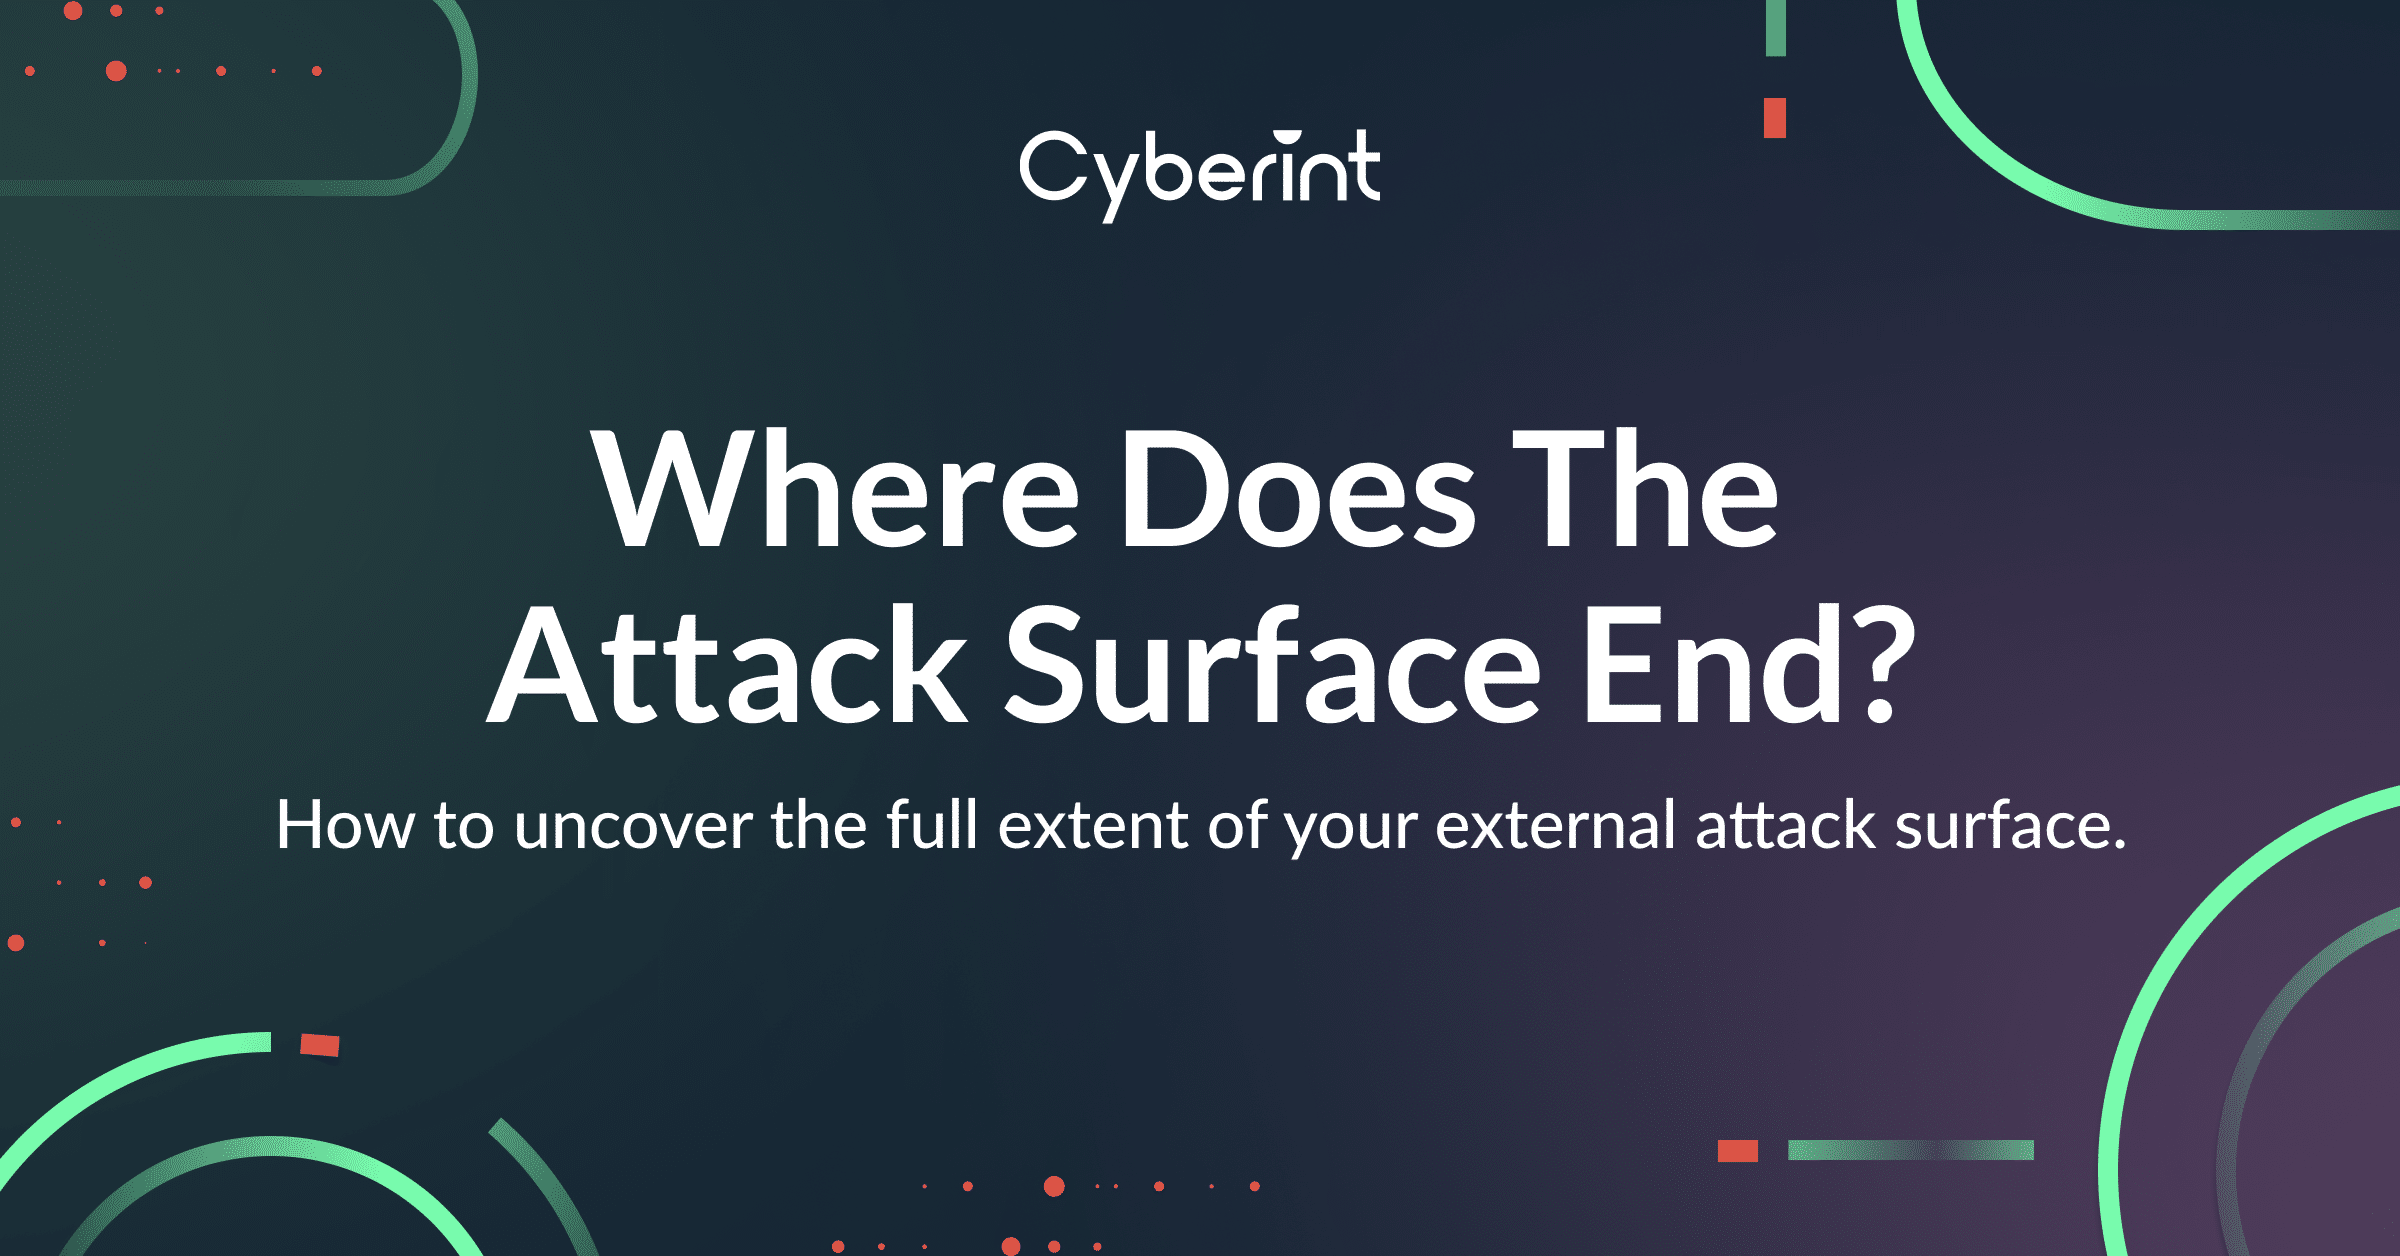 Where Does the Attack Surface End